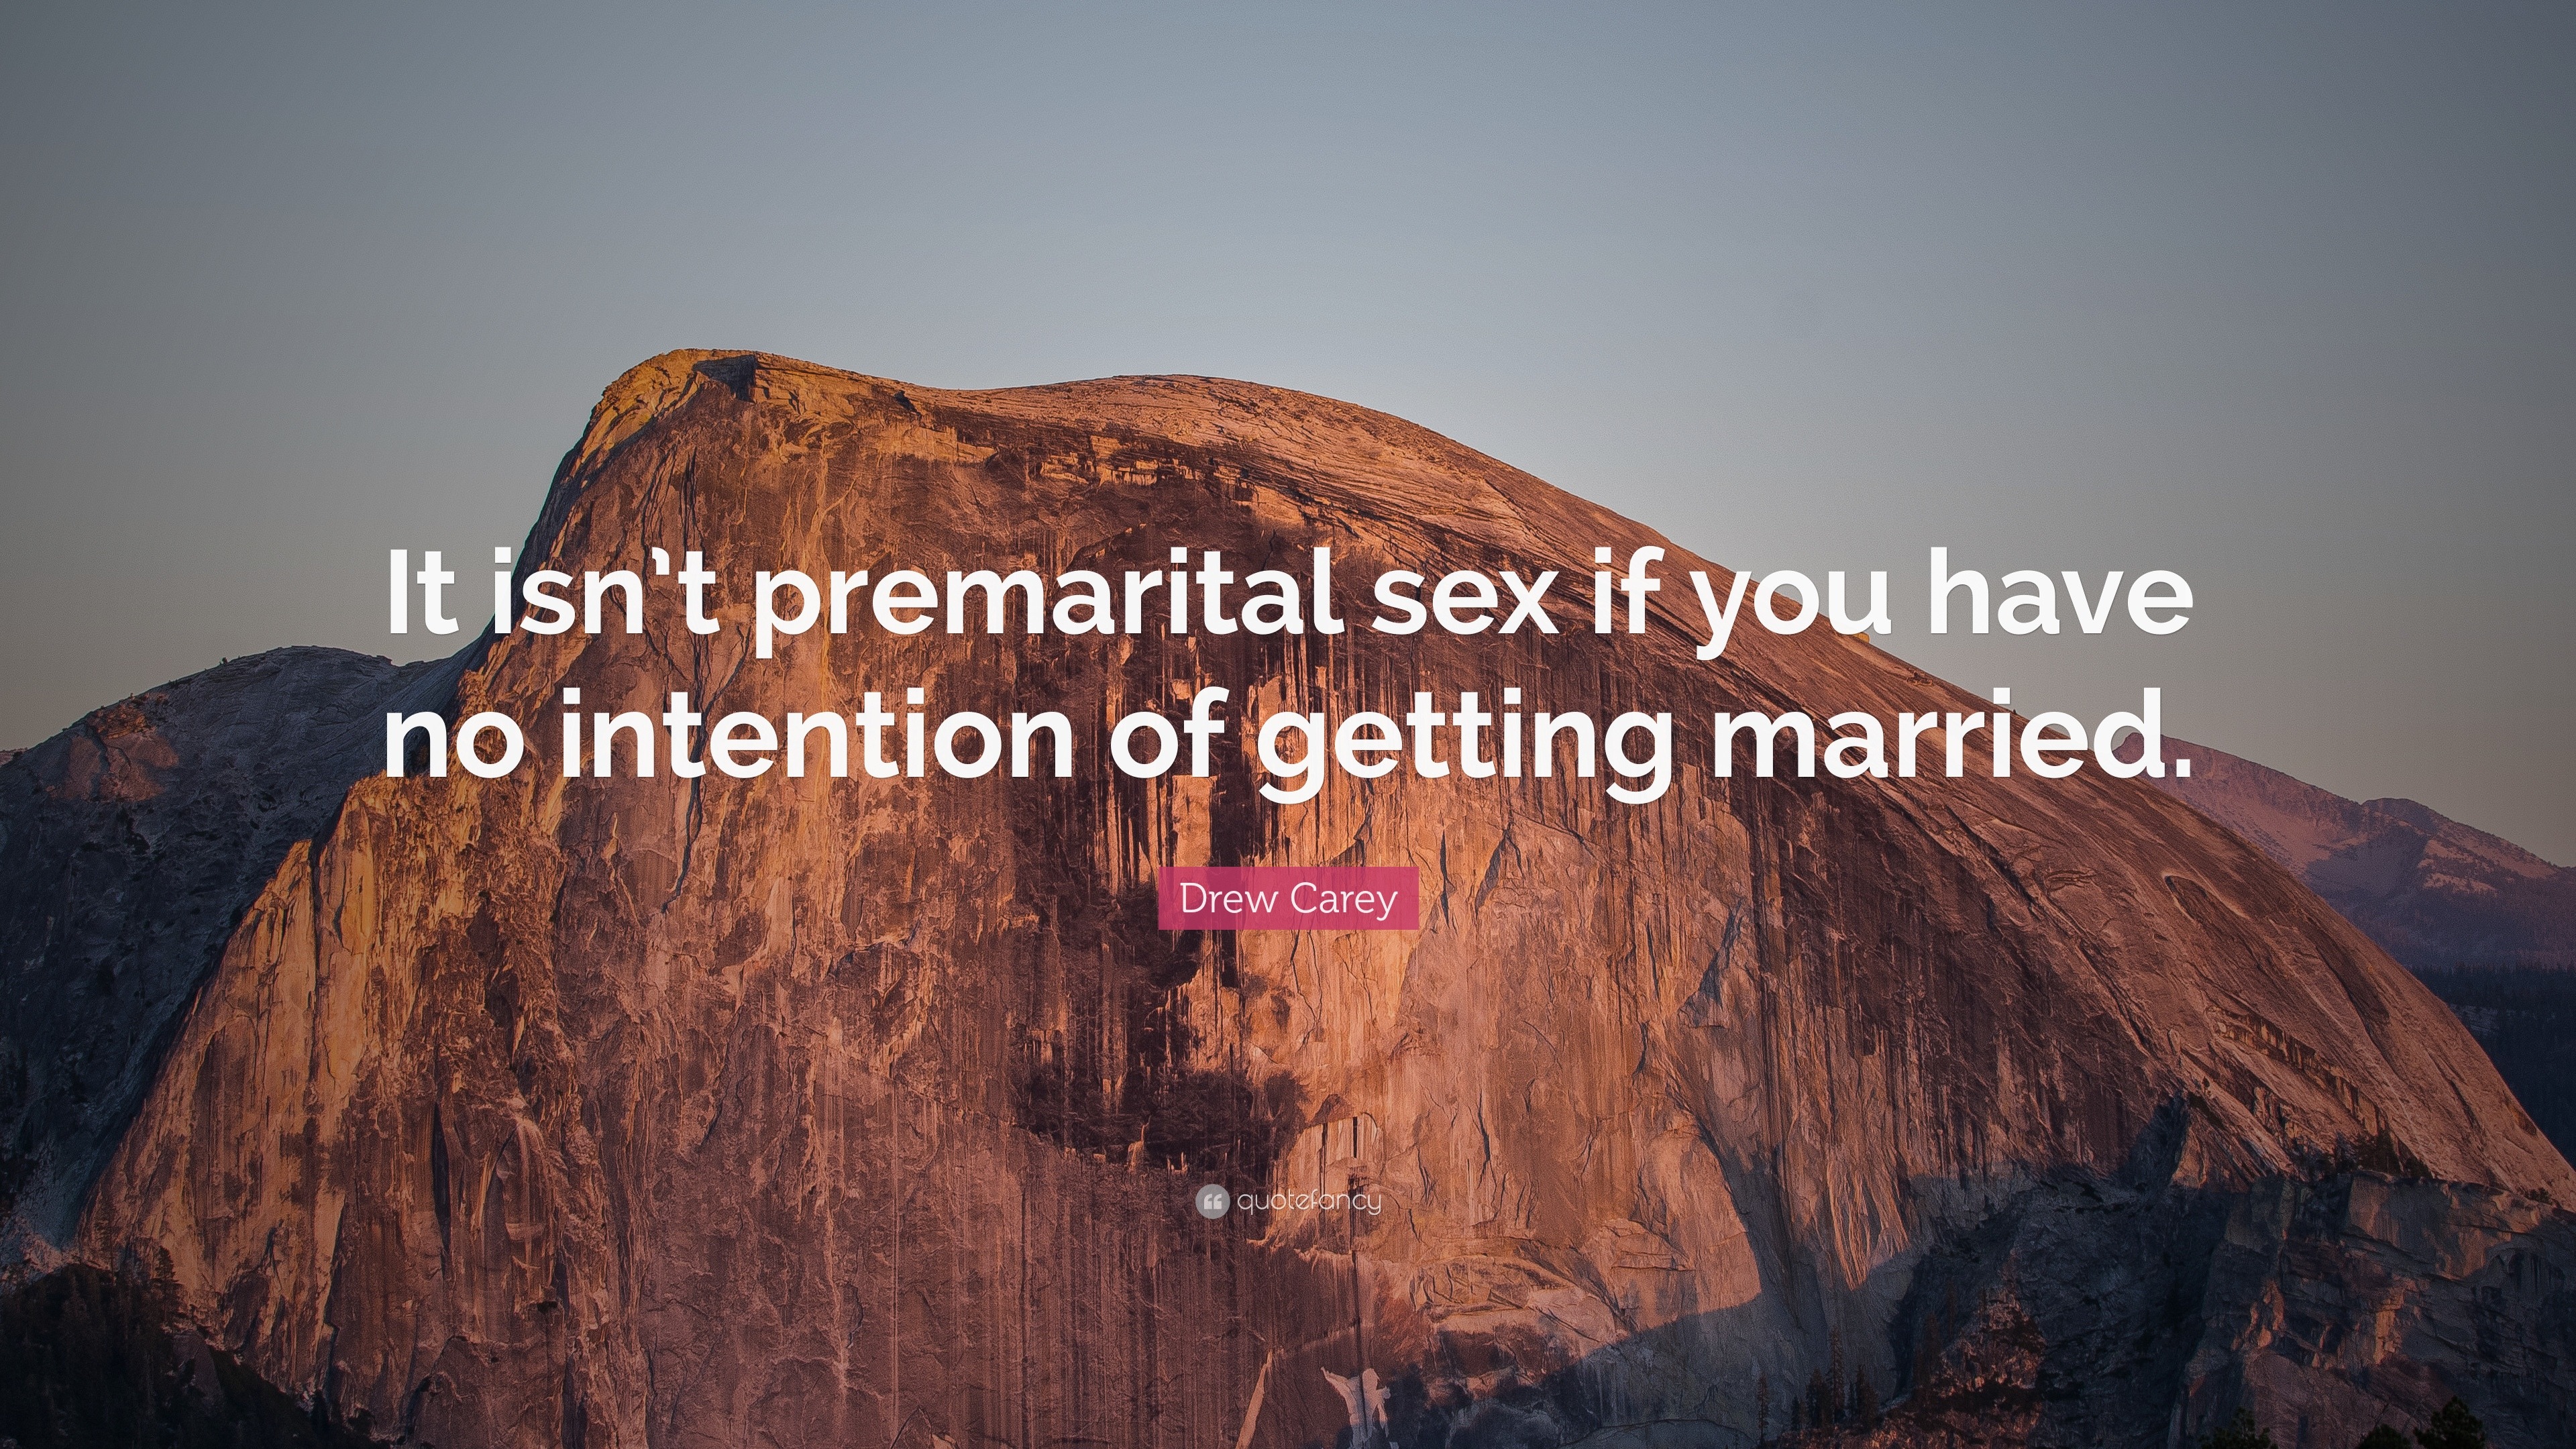 Drew Carey Quote “it Isnt Premarital Sex If You Have No Intention Of Getting Married” 